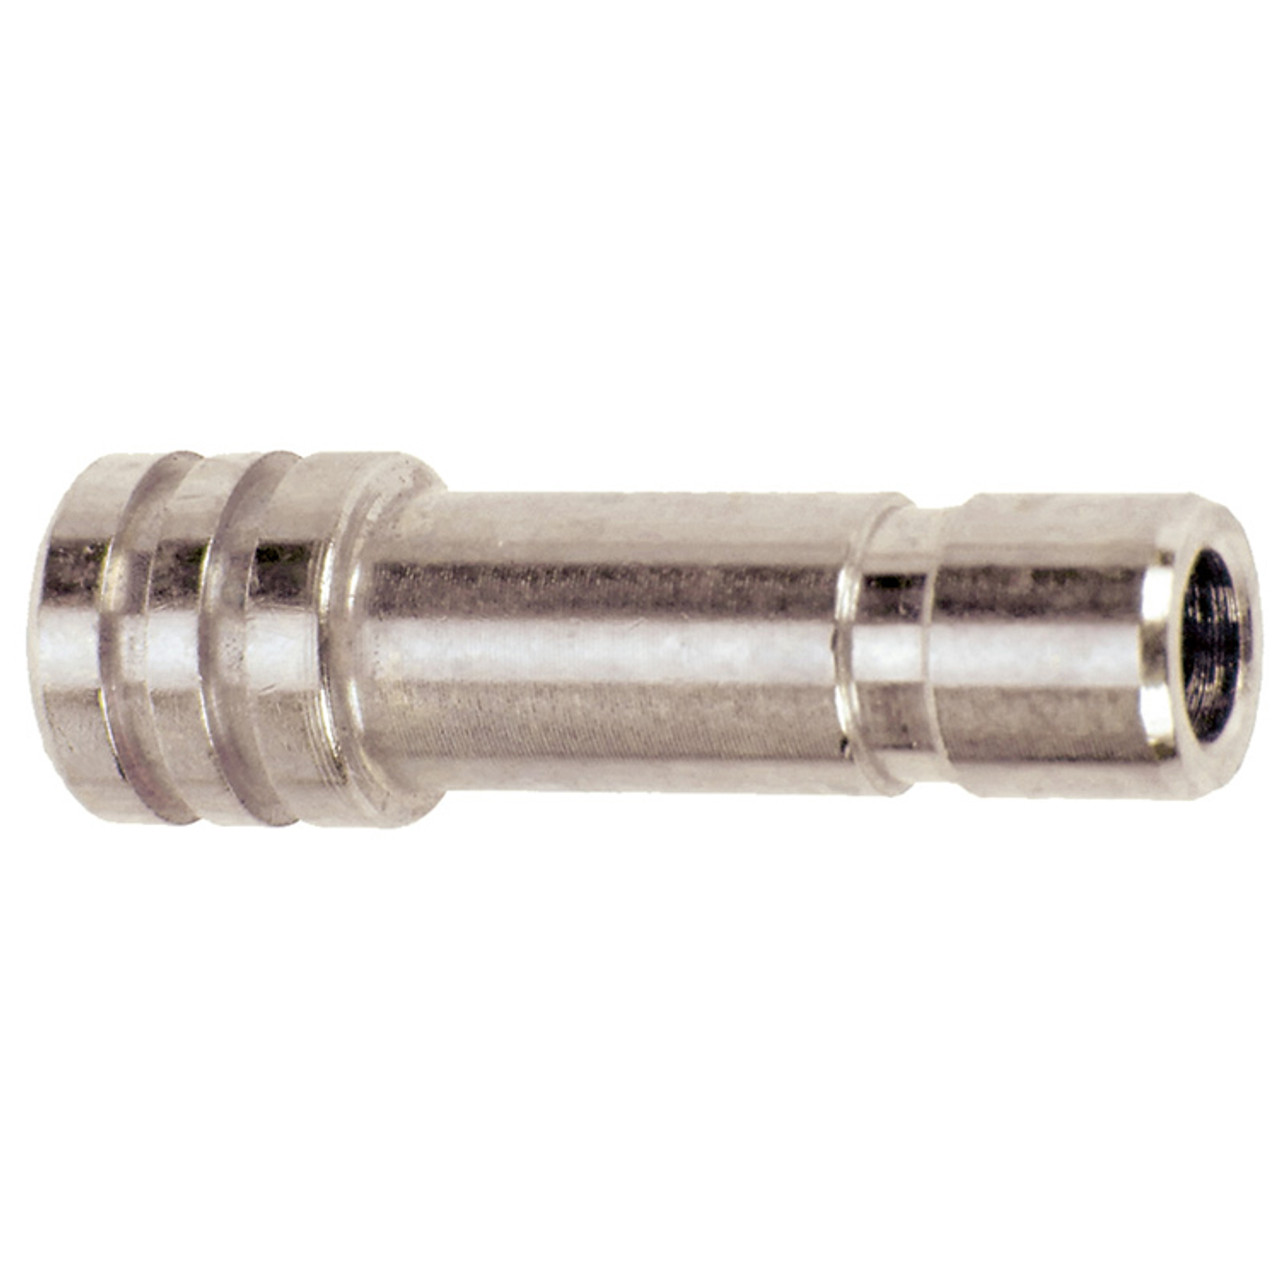 3/8" Nickel Plated Brass Push-To-Connect Plug   G6100P-06